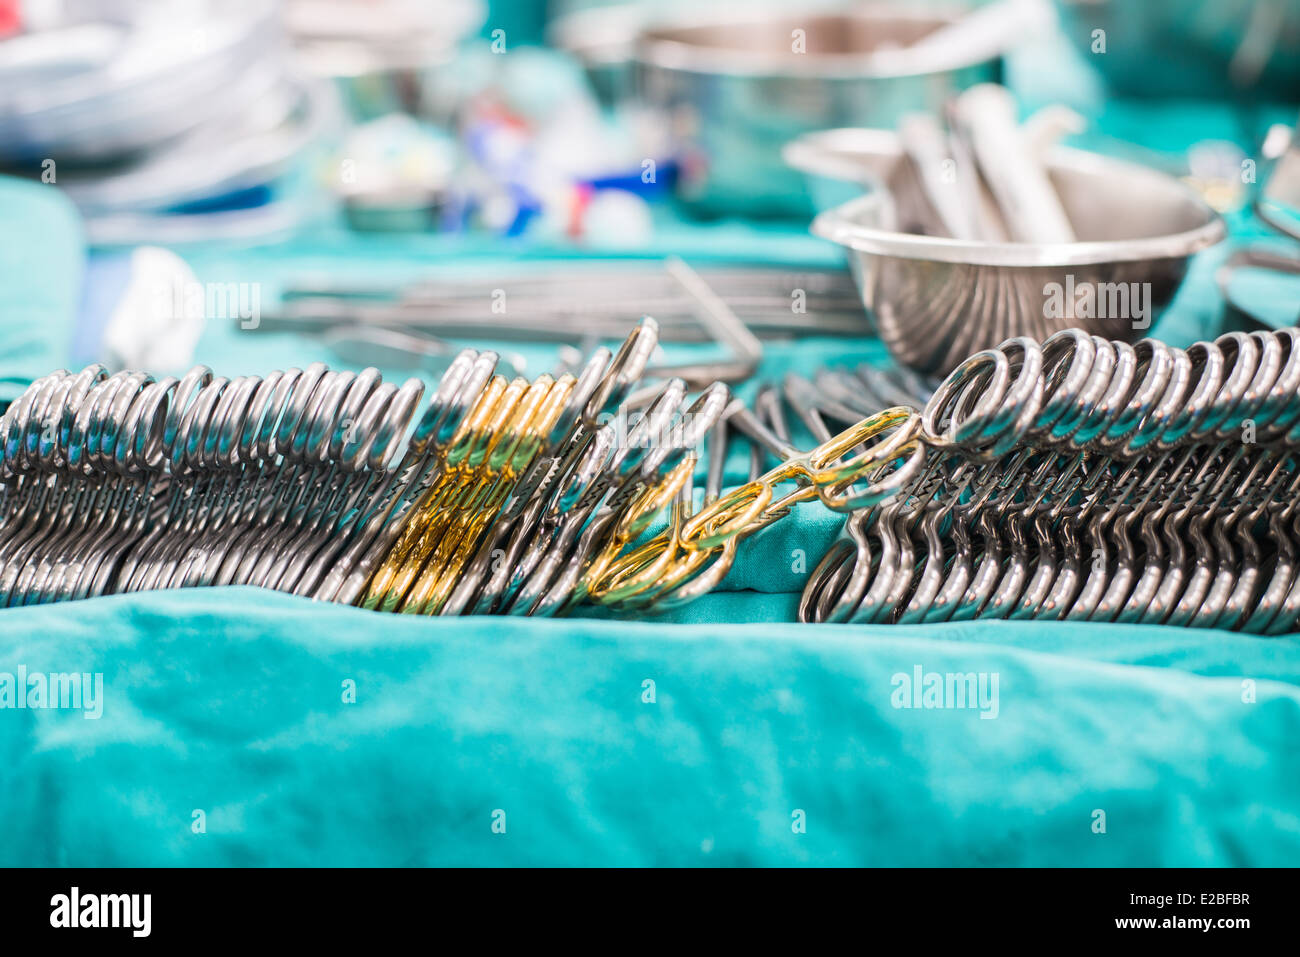 Surgical instruments for open heart surgery Stock Photo